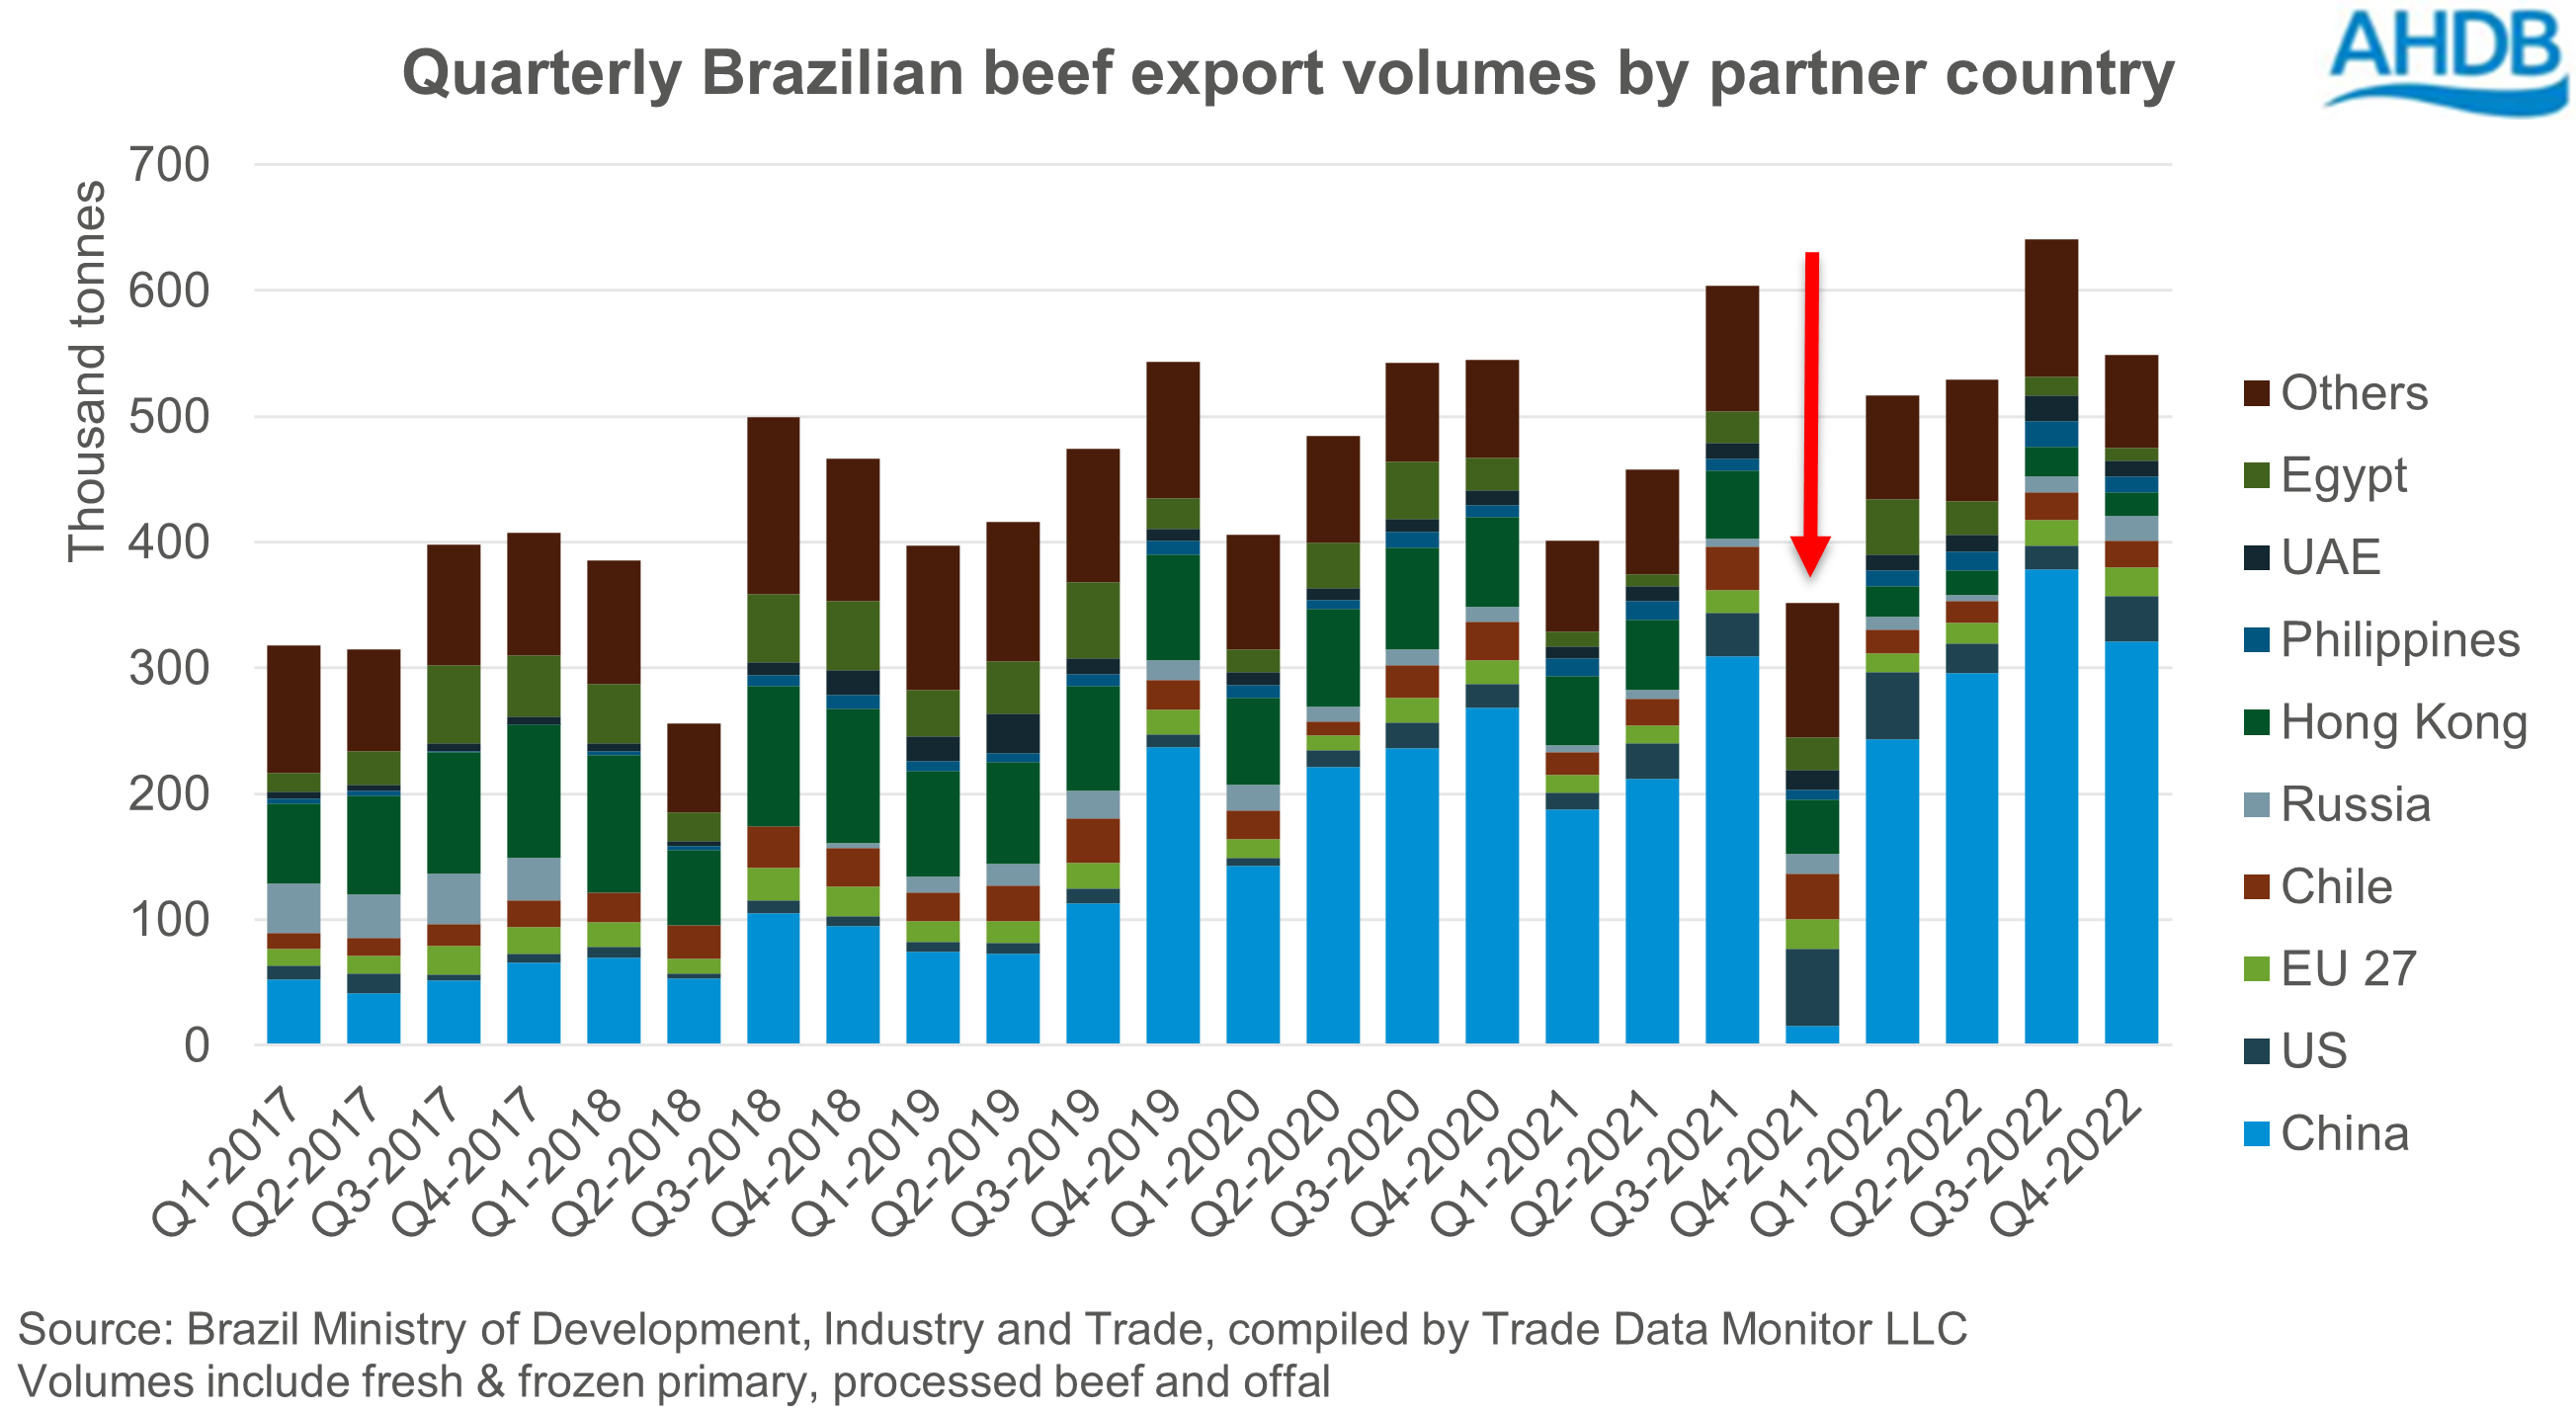 Graph showing quarterly Brazilian beef export volumes by partner country 